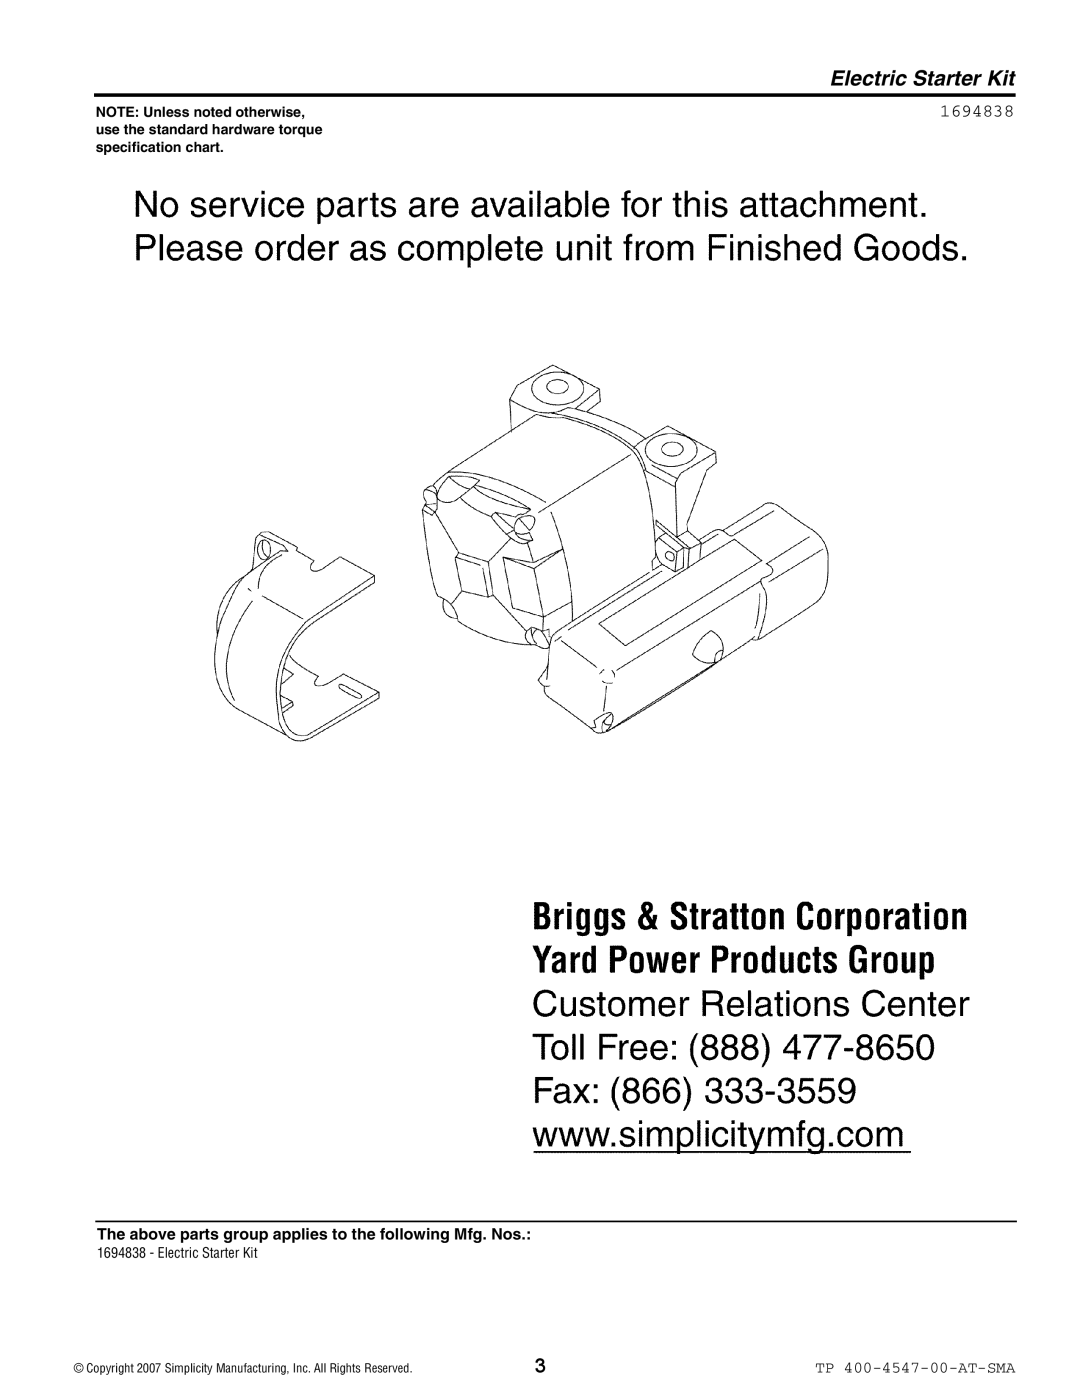 Simplicity 1694838 manual Electric Starter Kit, NOTE Unless noted otherwise, use the standard hardware torque 